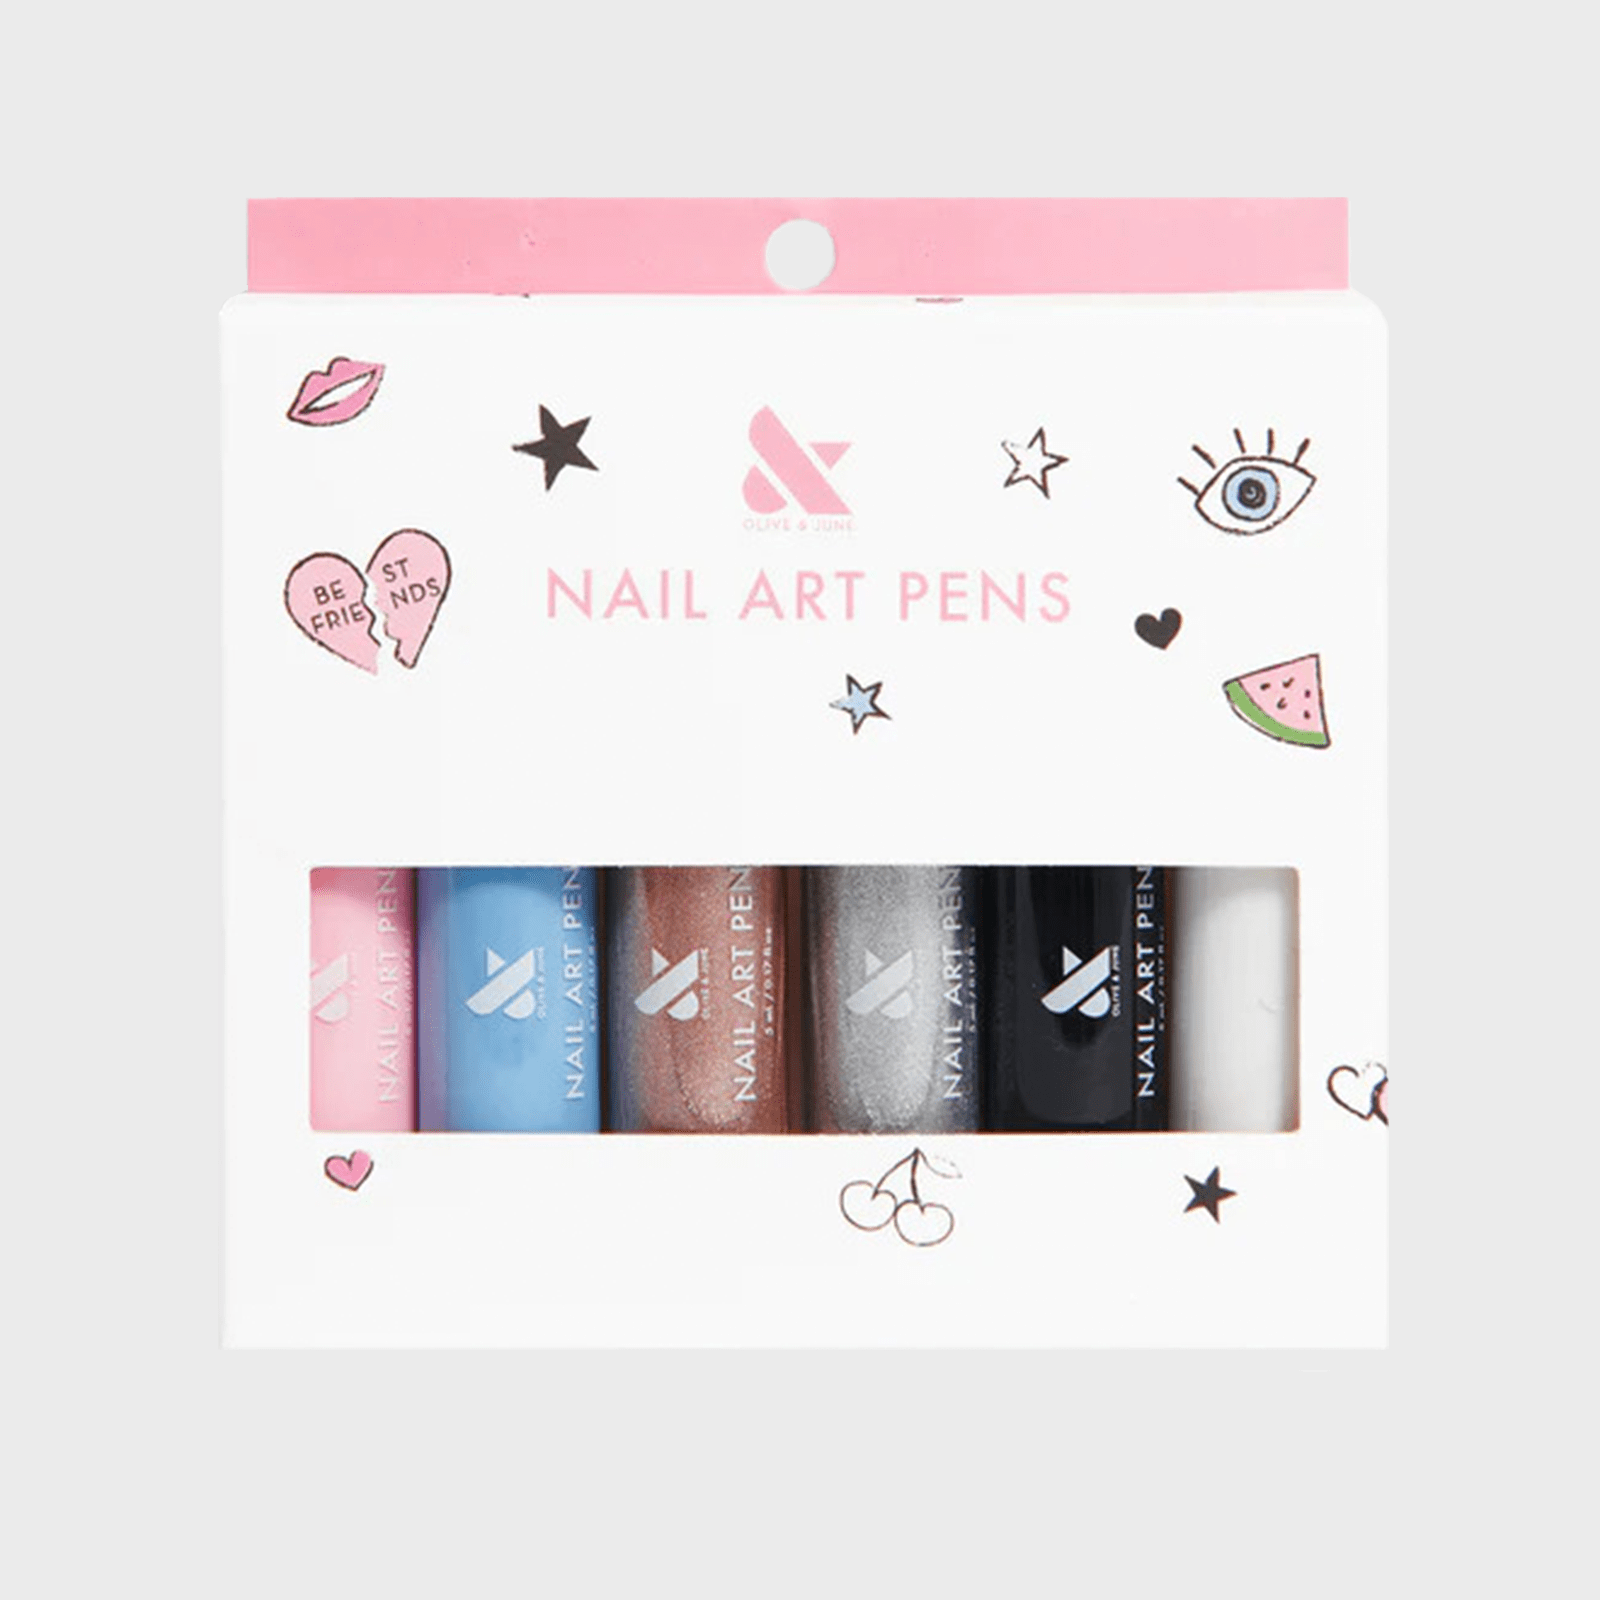 <p>Take her at-home mani to the next level with this fun <a href="https://oliveandjune.com/collections/shop-new/products/nail-art-pens" rel="noopener noreferrer">nail art pen set</a>. This salon quality, vegan polish set comes with six of the brand's best loved colors, but in double-sided pen. One side features a fine pen tip that's perfect for creating dots, flowers, initials and hearts. The other side has a striper brush that's ideal for getting perfect french tips or fun geometric designs.</p> <p class="listicle-page__cta-button-shop"><a class="shop-btn" href="https://oliveandjune.com/collections/shop-new/products/nail-art-pens">Shop Now</a></p> <h2>How we chose the best gifts for girls</h2> <p>When searching for the best gifts for girls, we took several factors into consideration. We sought out recommendations from teachers, parents, tweens and teens to get a sense of what kids are into these days, and also included some of our own tried and true personal favorites. We then combed through stacks of holiday catalogs and toy roundups to find the best items for all ages at a variety of price points.</p> <p><b>Stop hunting for the best products and deals—get our expert scoop on secret sales and discounts, gift ideas for everyone, and can’t-miss products. Sign up for the </b><a href="https://www.rd.com/newsletter/"><b>Stuff We Love newsletter</b></a><b>.</b></p>